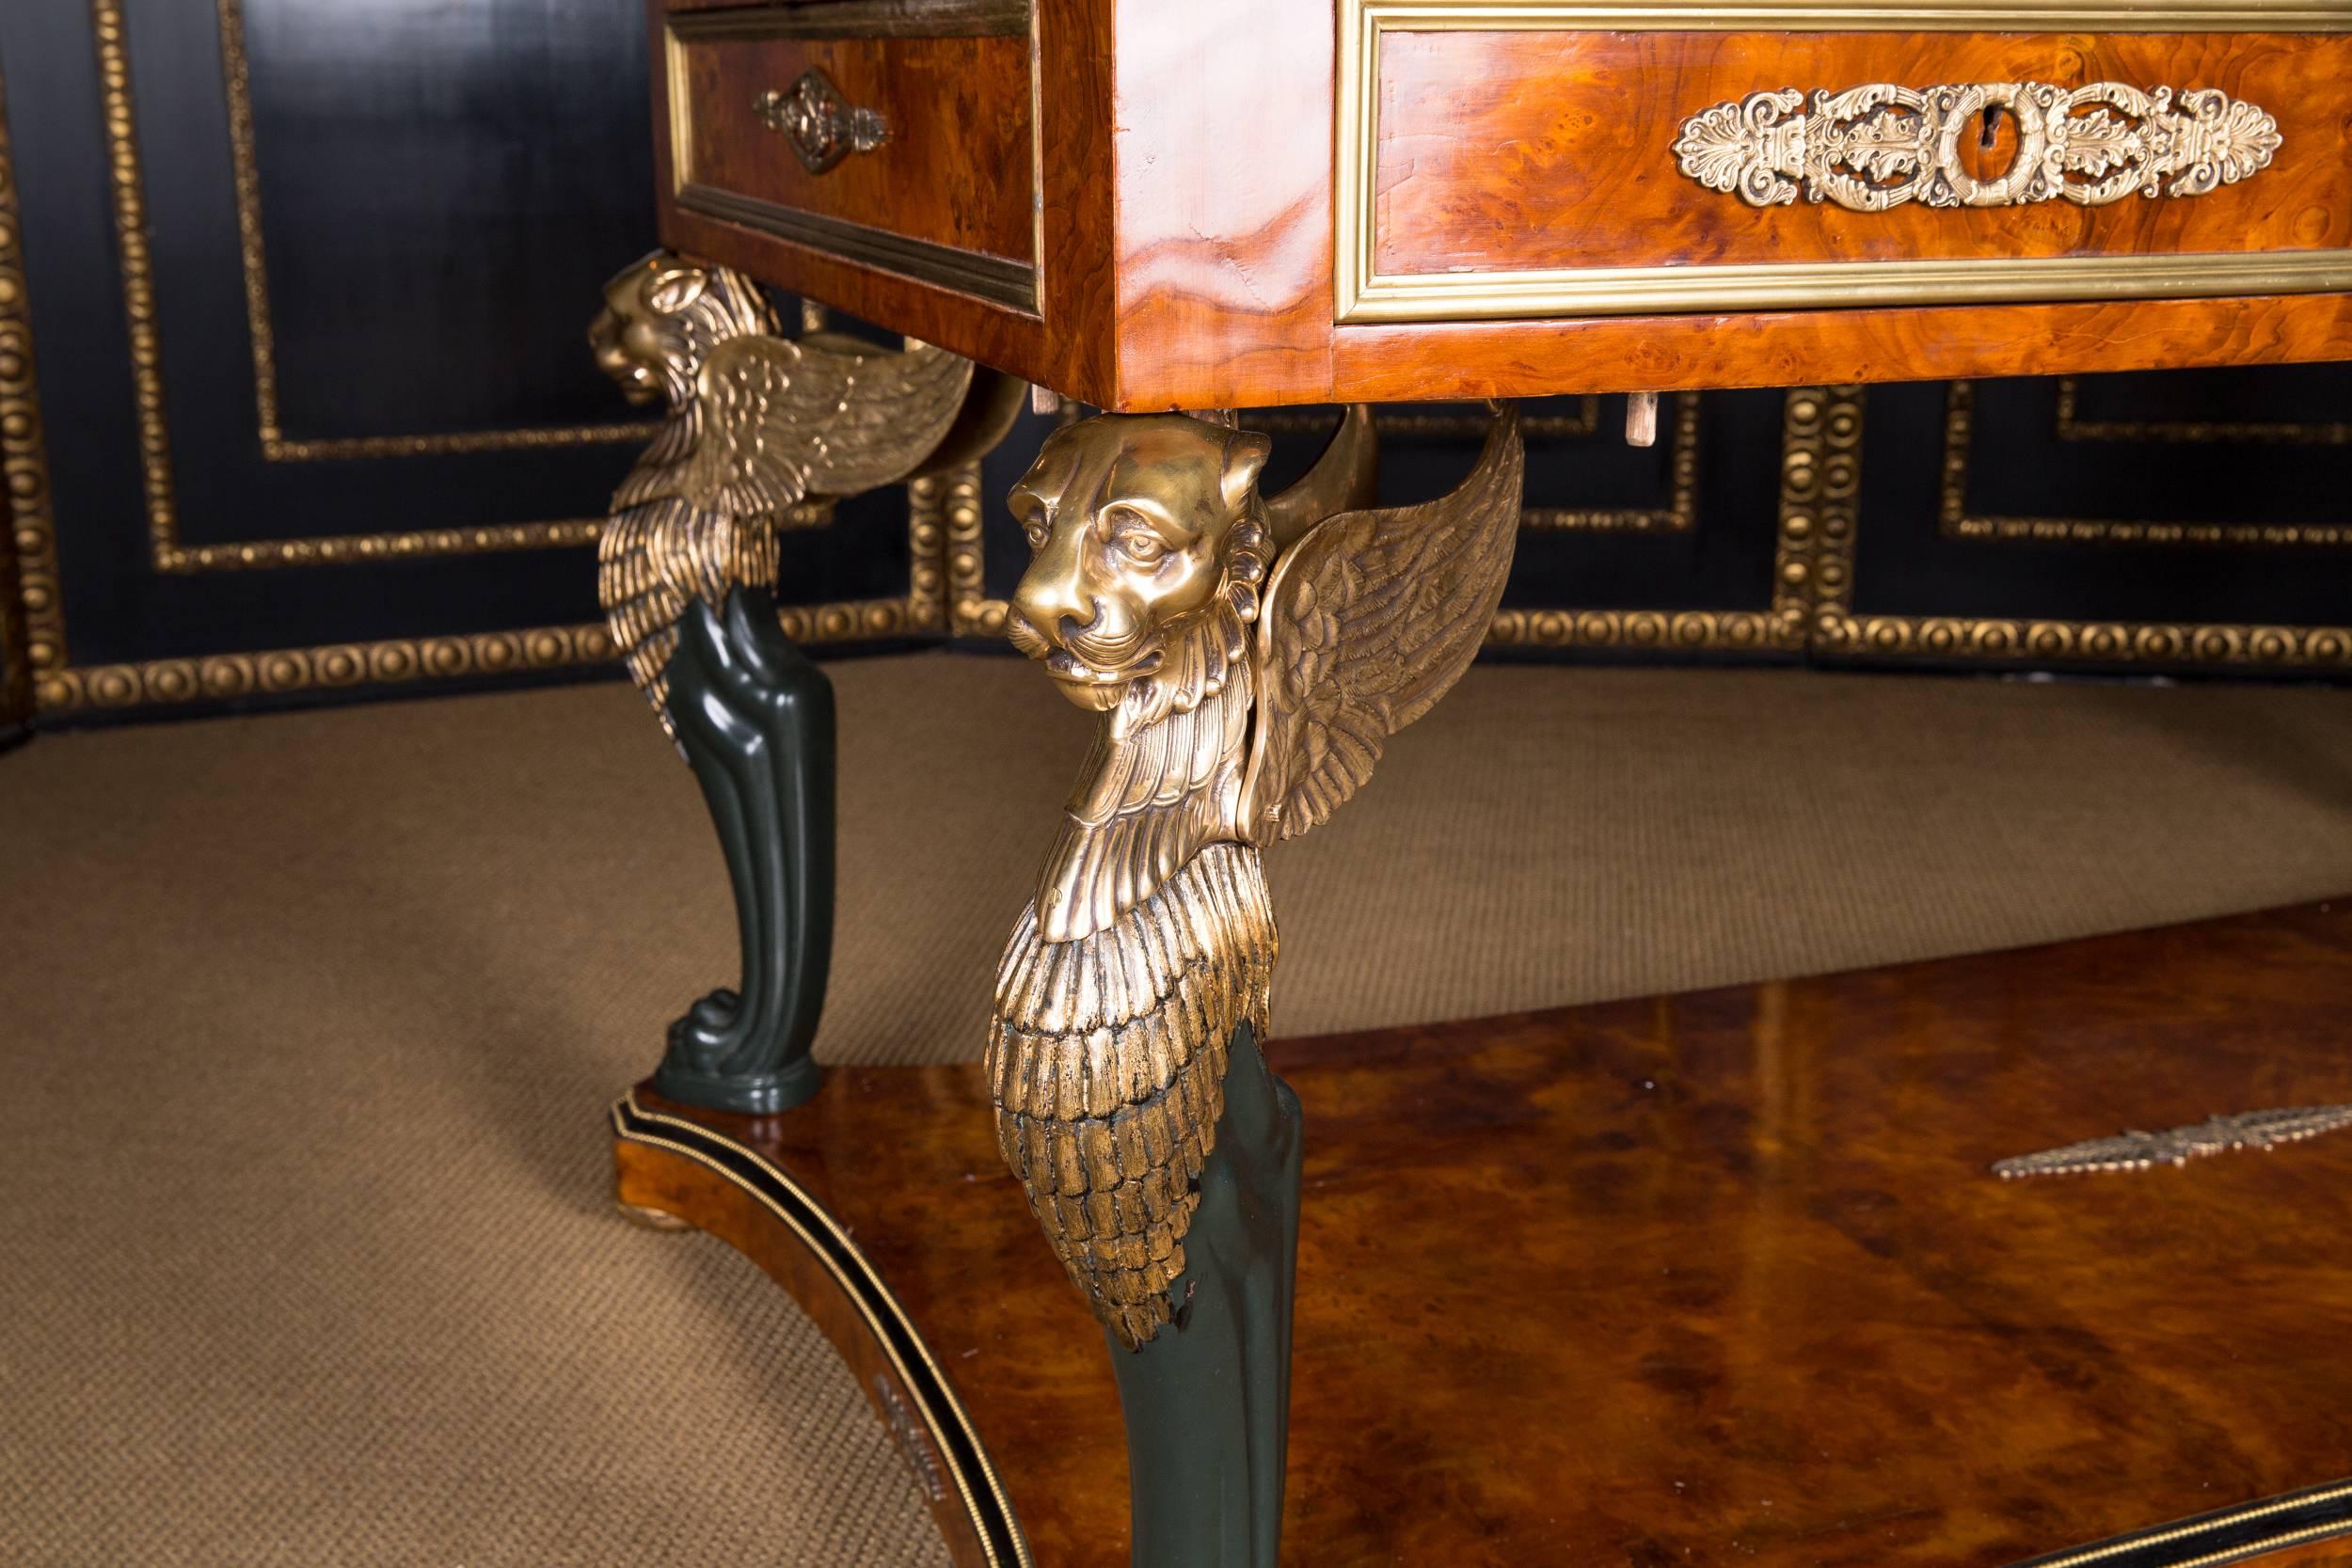 Birdseye Maple 20th Century, French Desk or Bureau Plat with Lions in the Empire Style